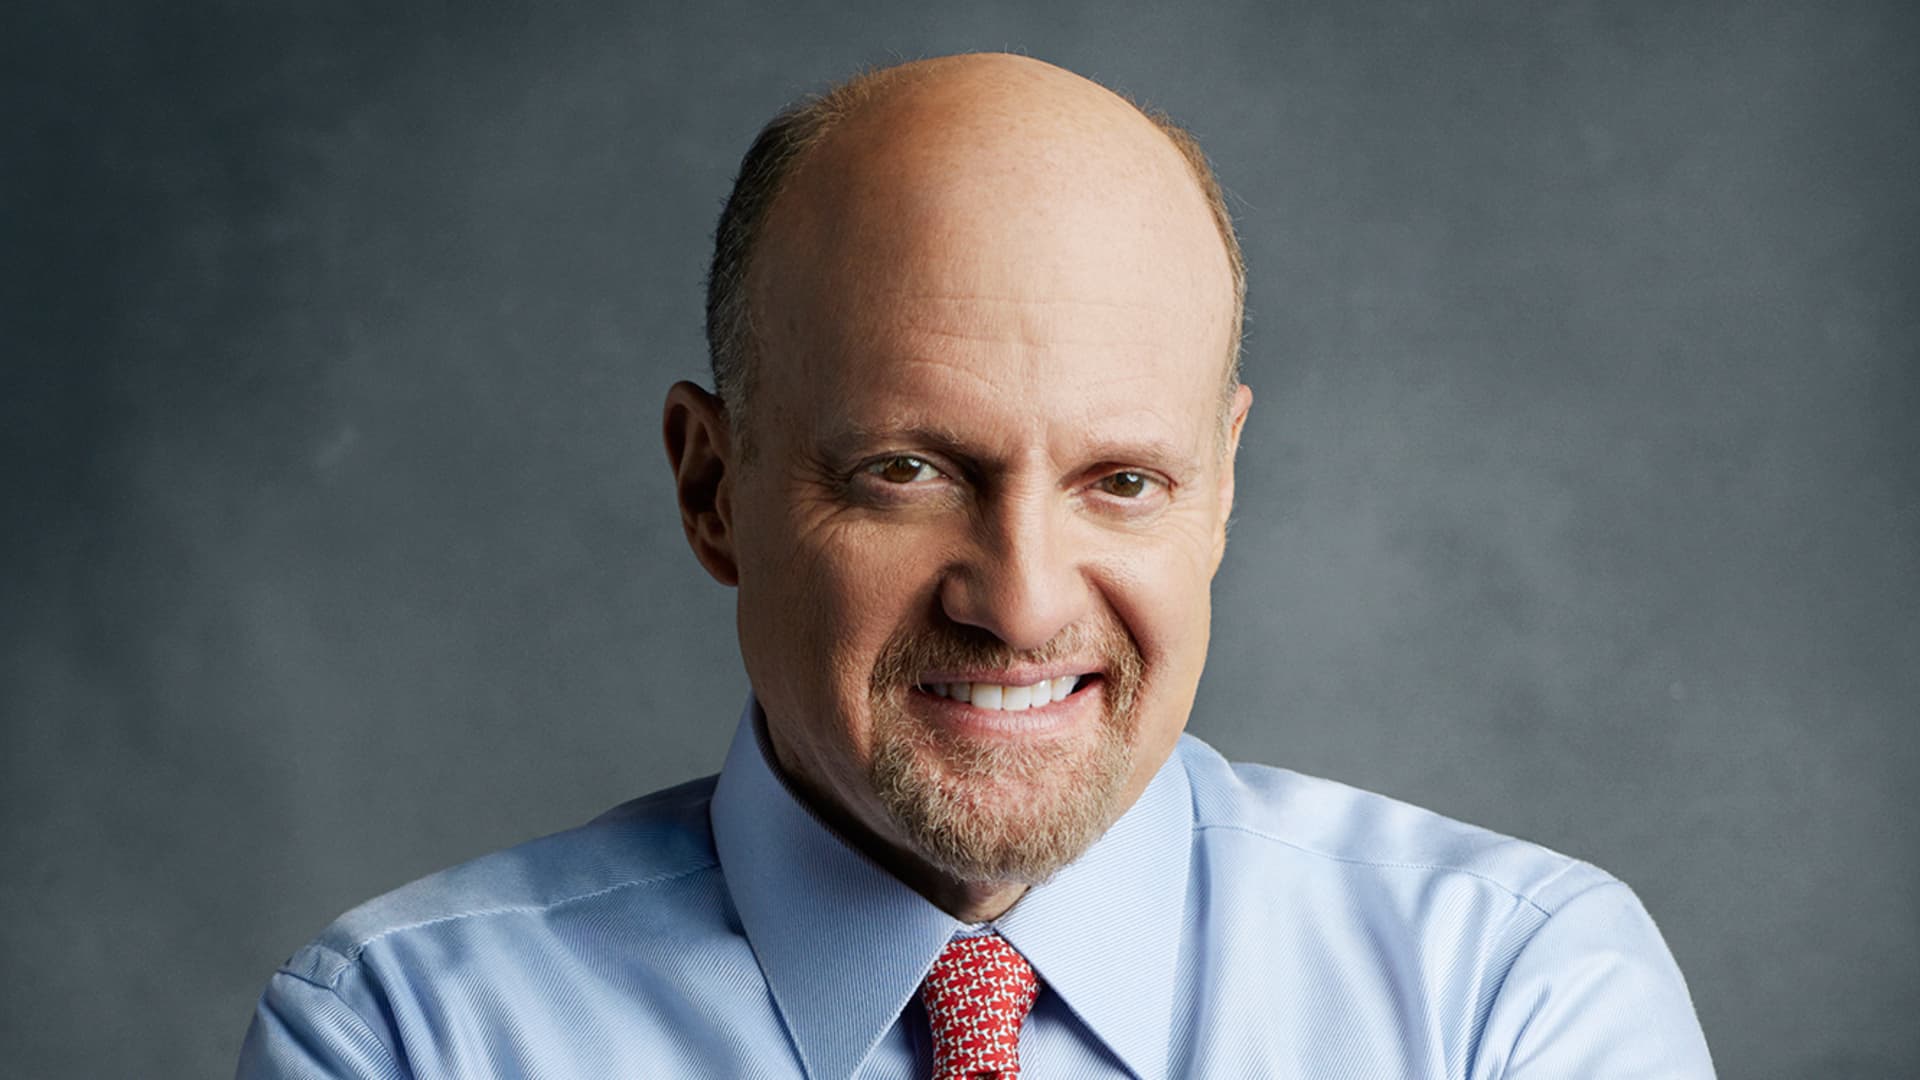 Crypto Community Reacts Positively to Jim Cramer’s Market Warning, Jokingly Hints at a Potential Bull Run